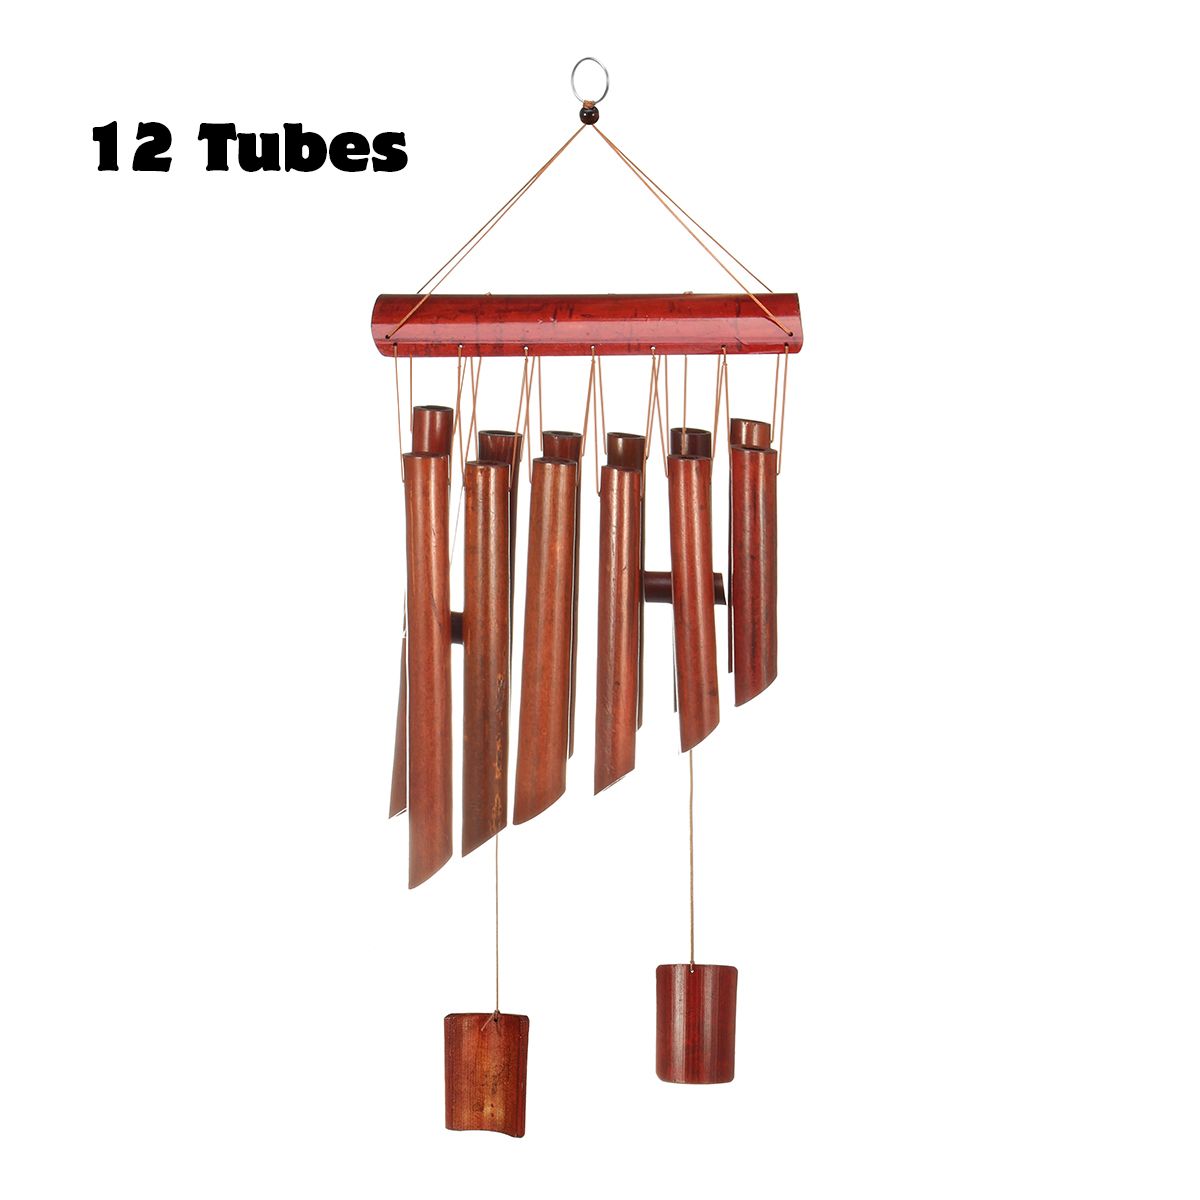 12-Tubes-Bamboo-Wind-Chime-Wooden-Garden-Yark-Patio-Home-Decorations-Hanging-Ornament-1513581